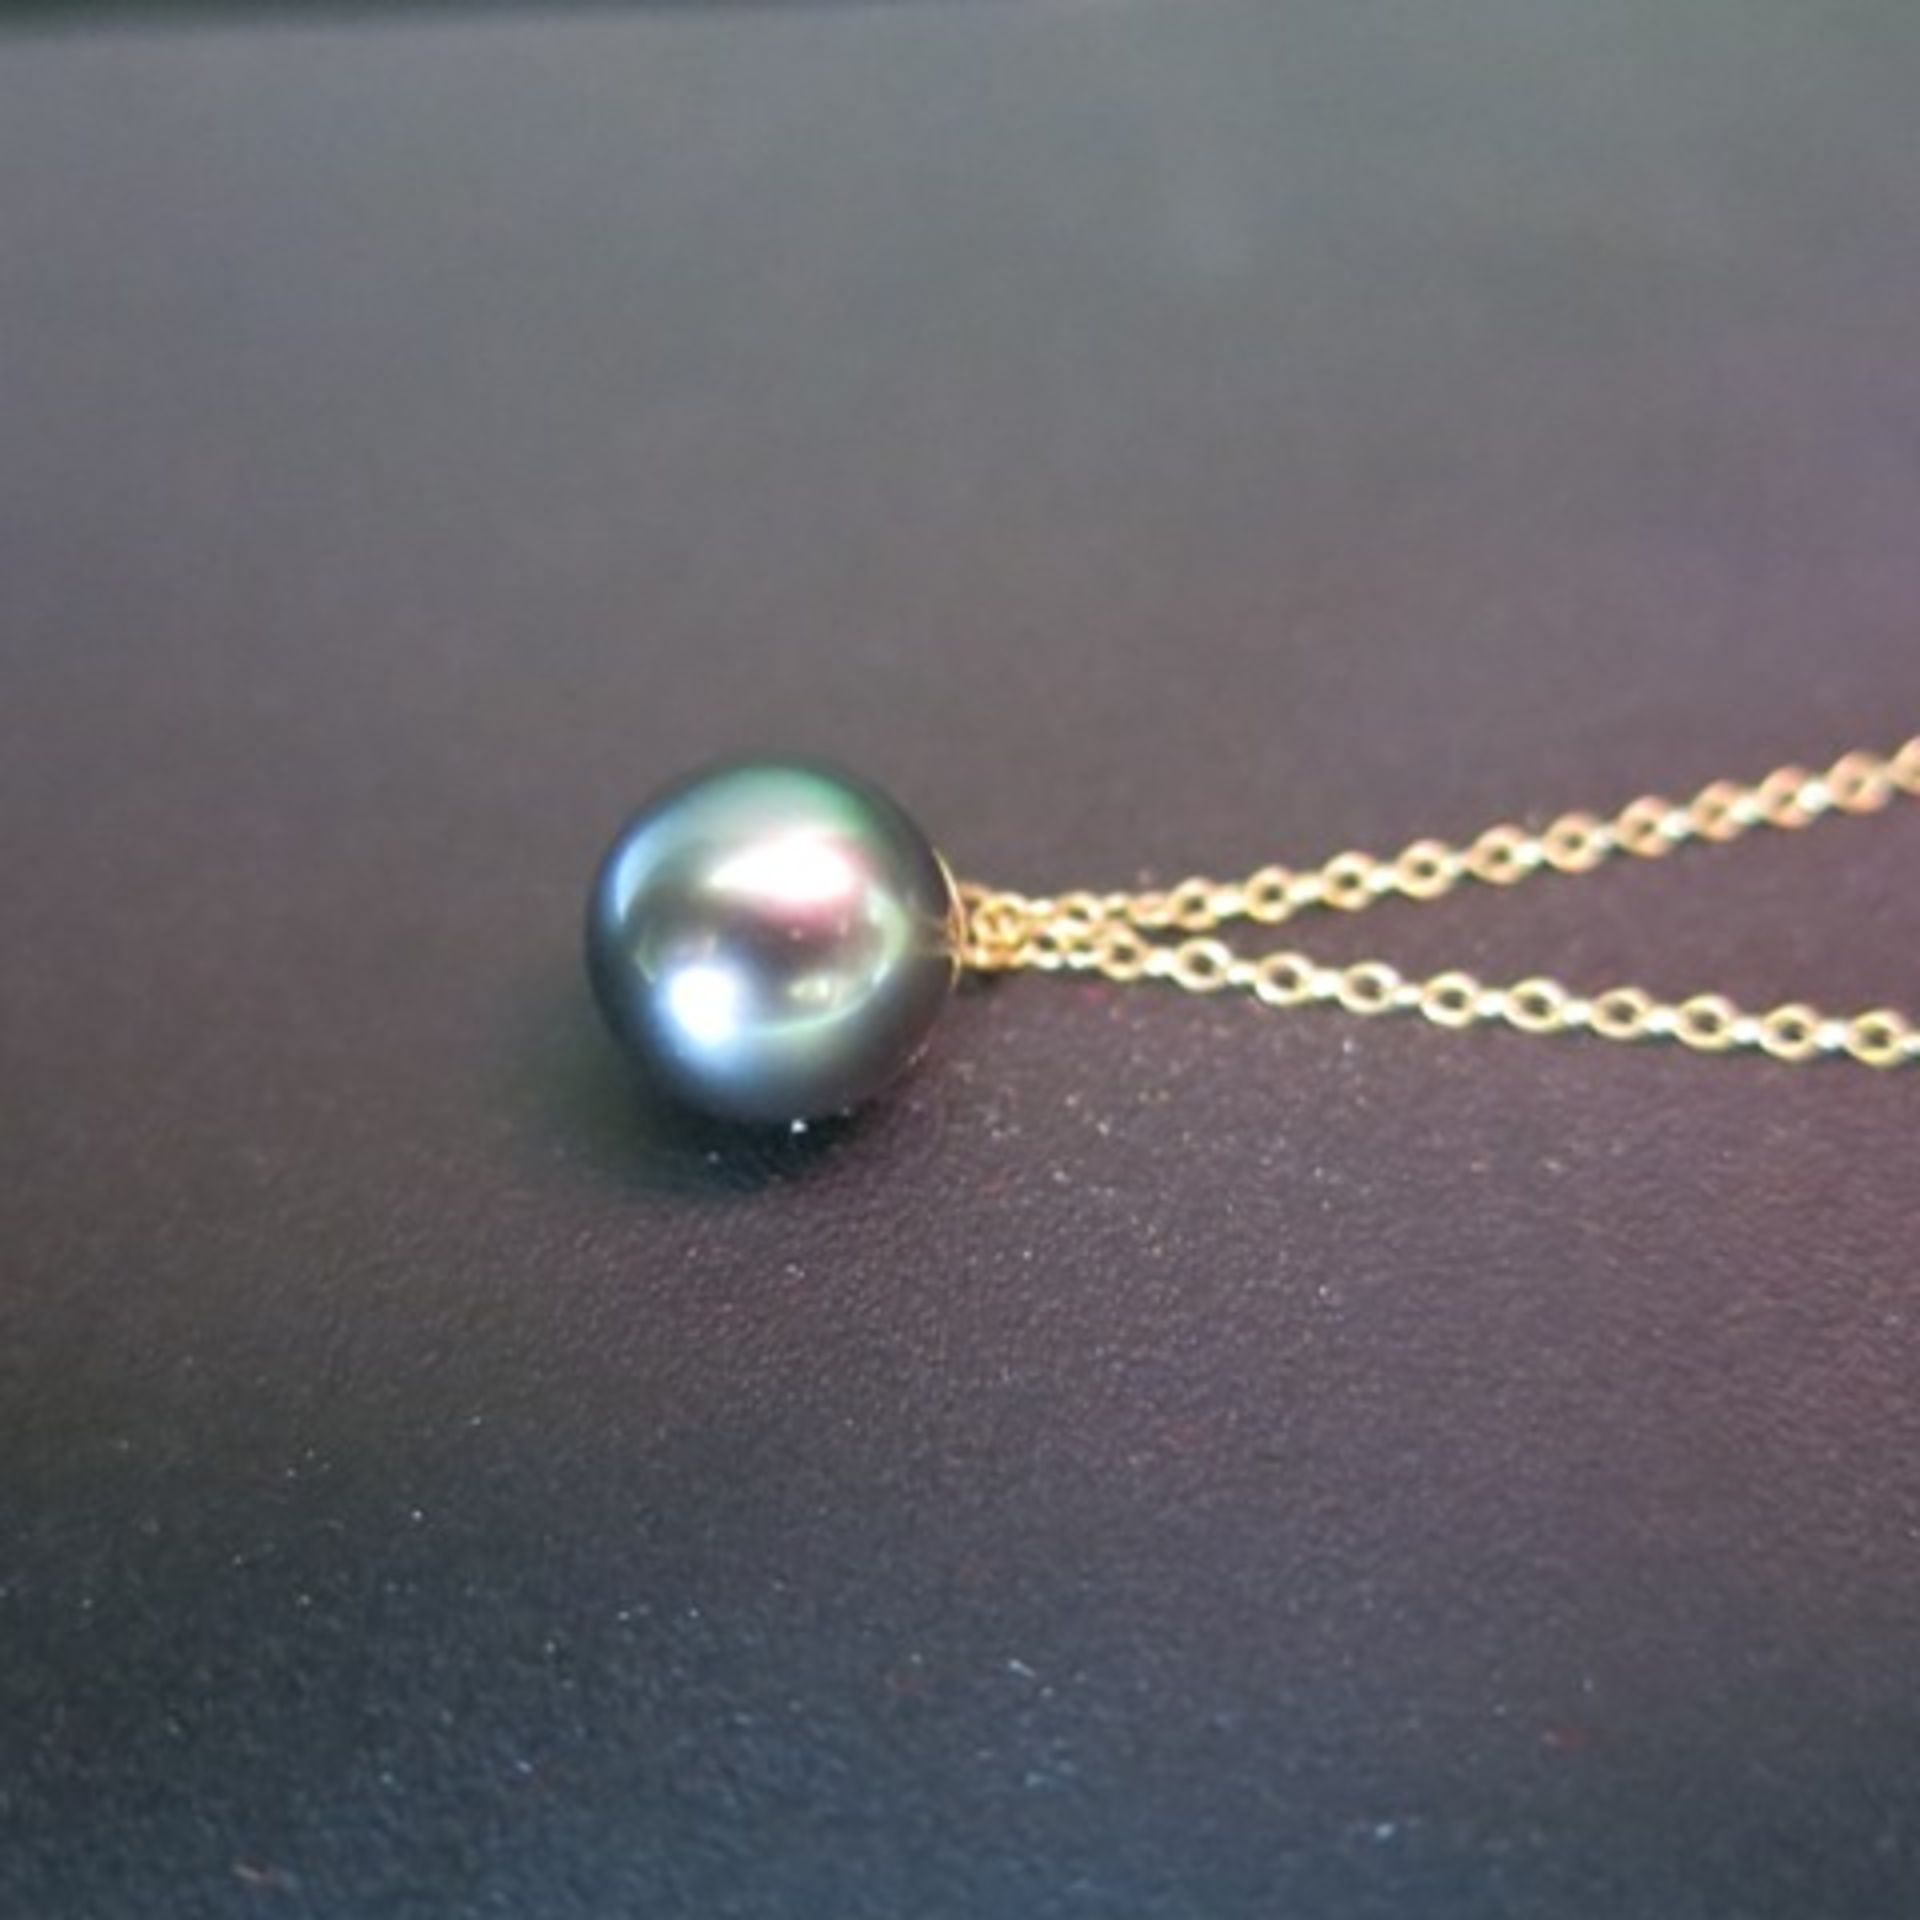 Tahitian 9mm Black Pearl Necklace with 21ct (875) Yellow Gold Chain. RRP £1200.00 - Image 3 of 3